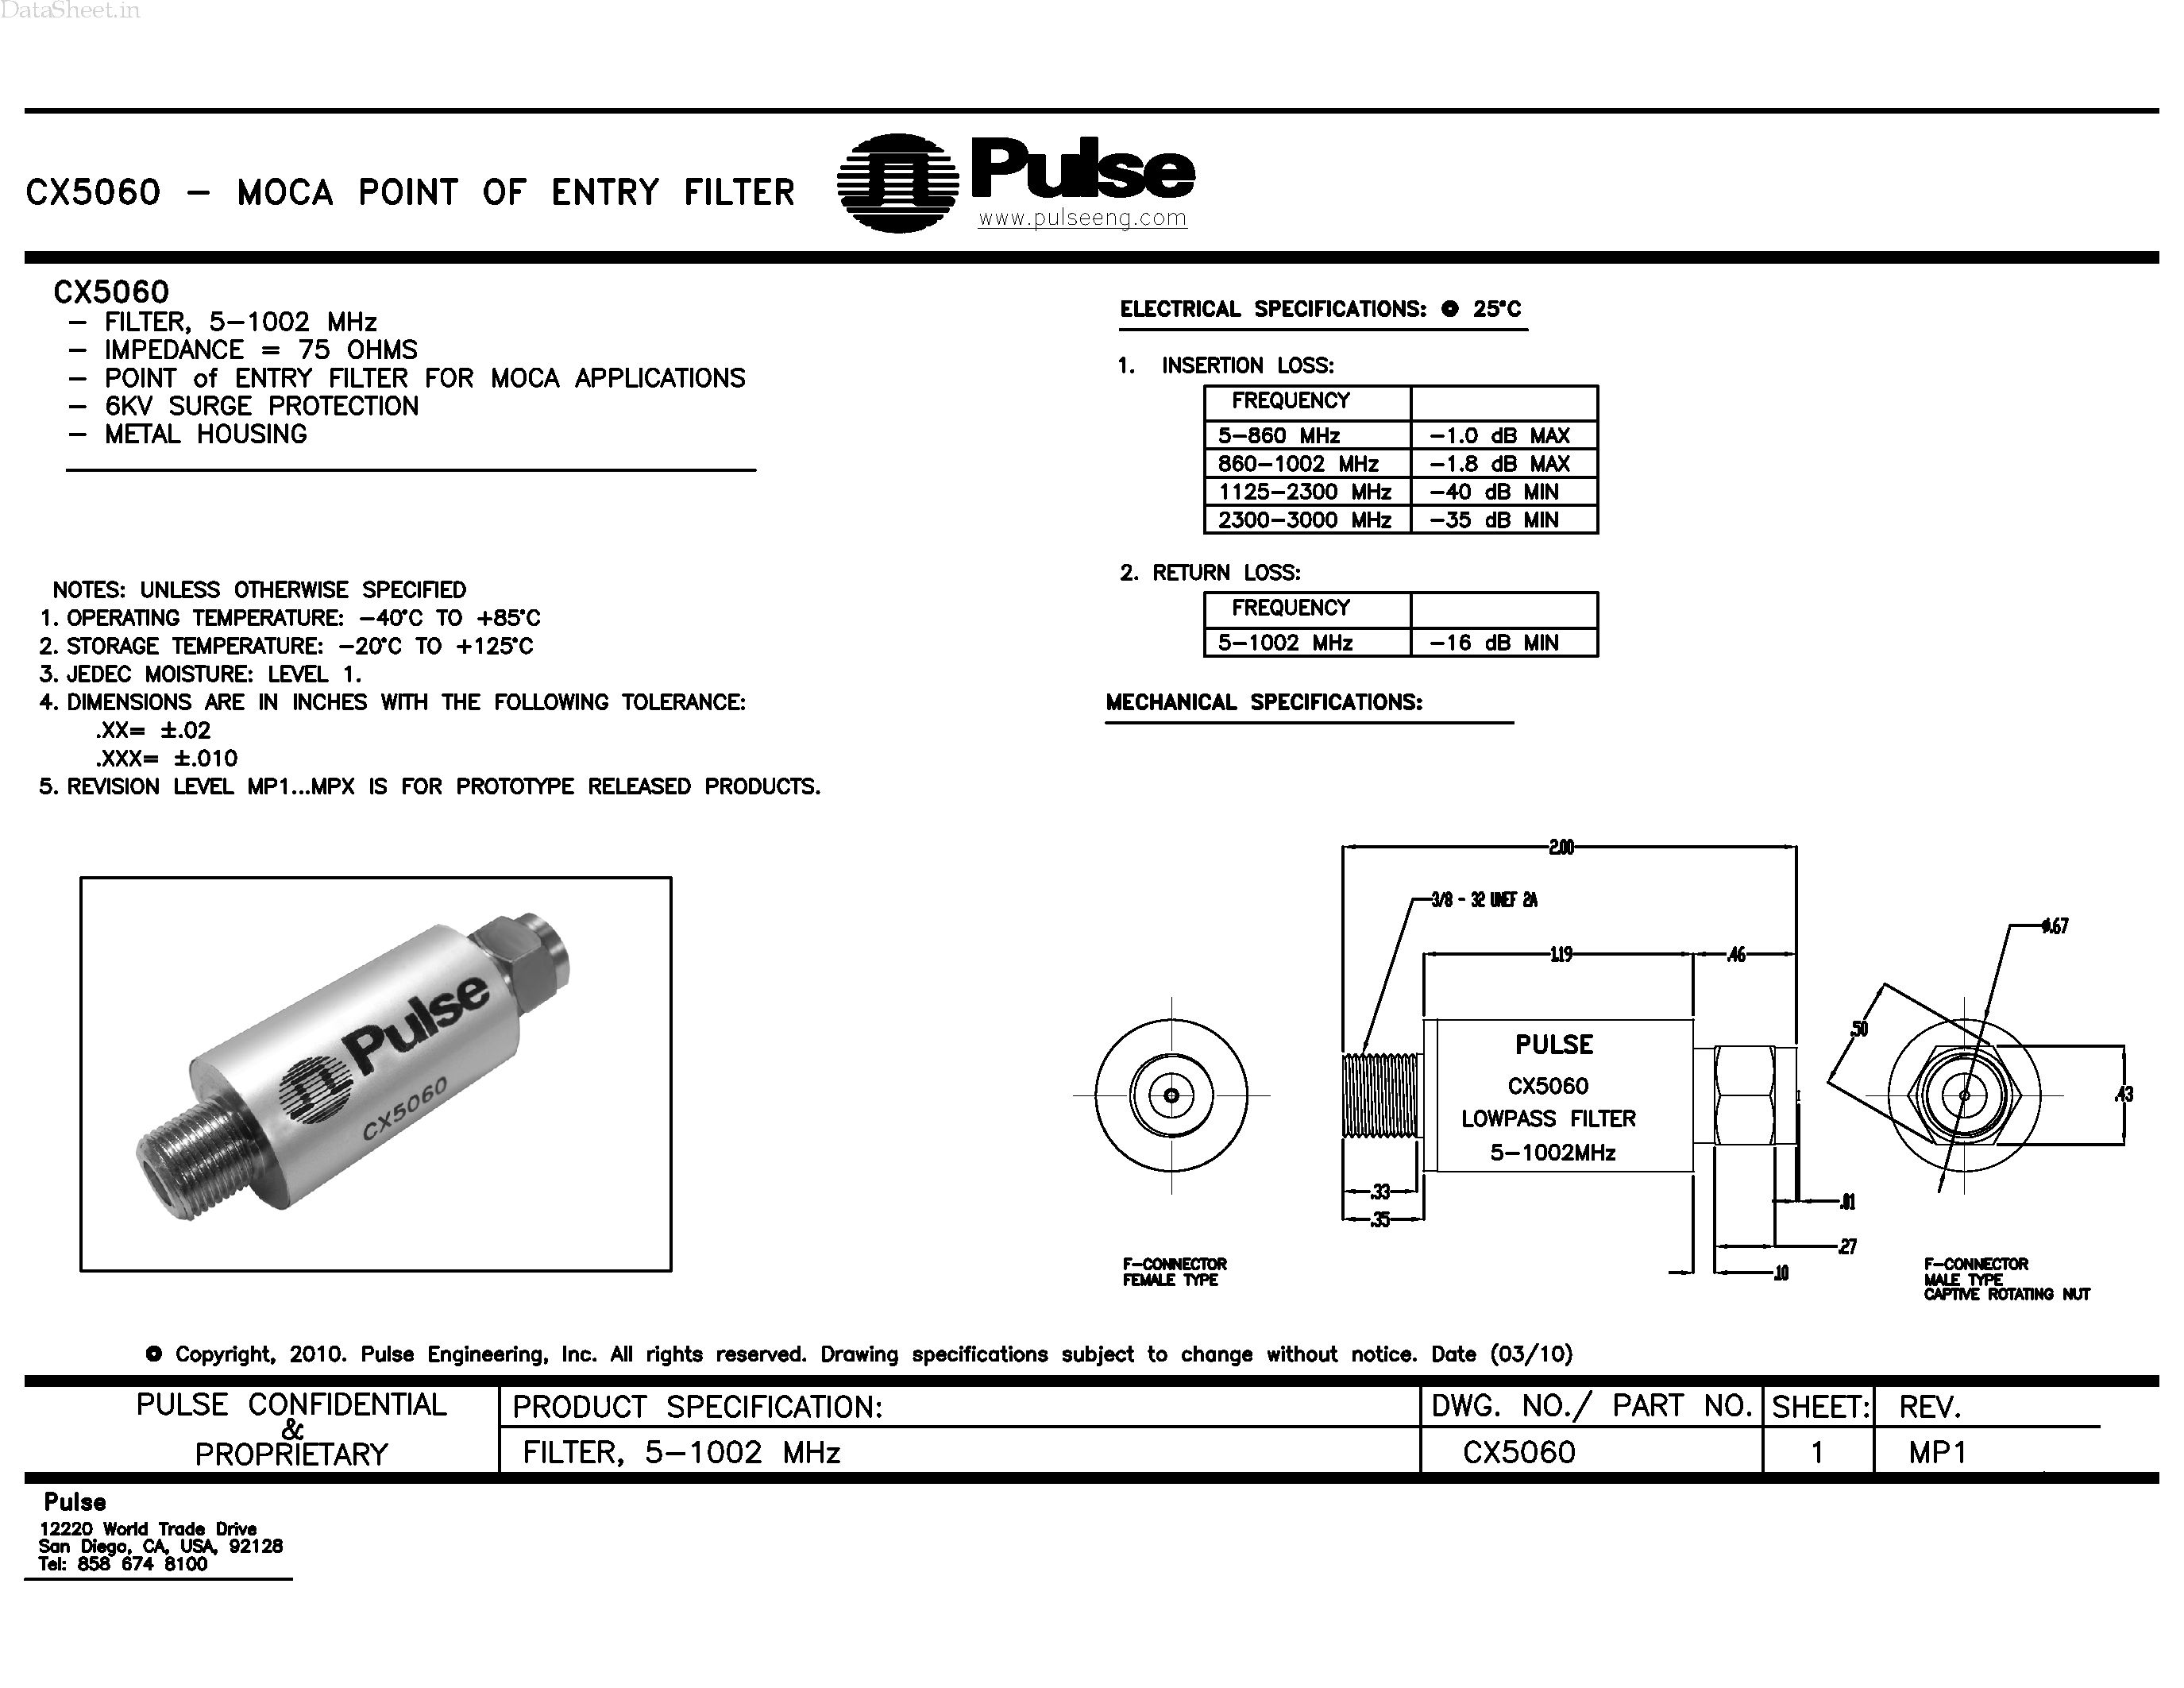 Datasheet CX5060 - Moca Point of Entry Filter page 1